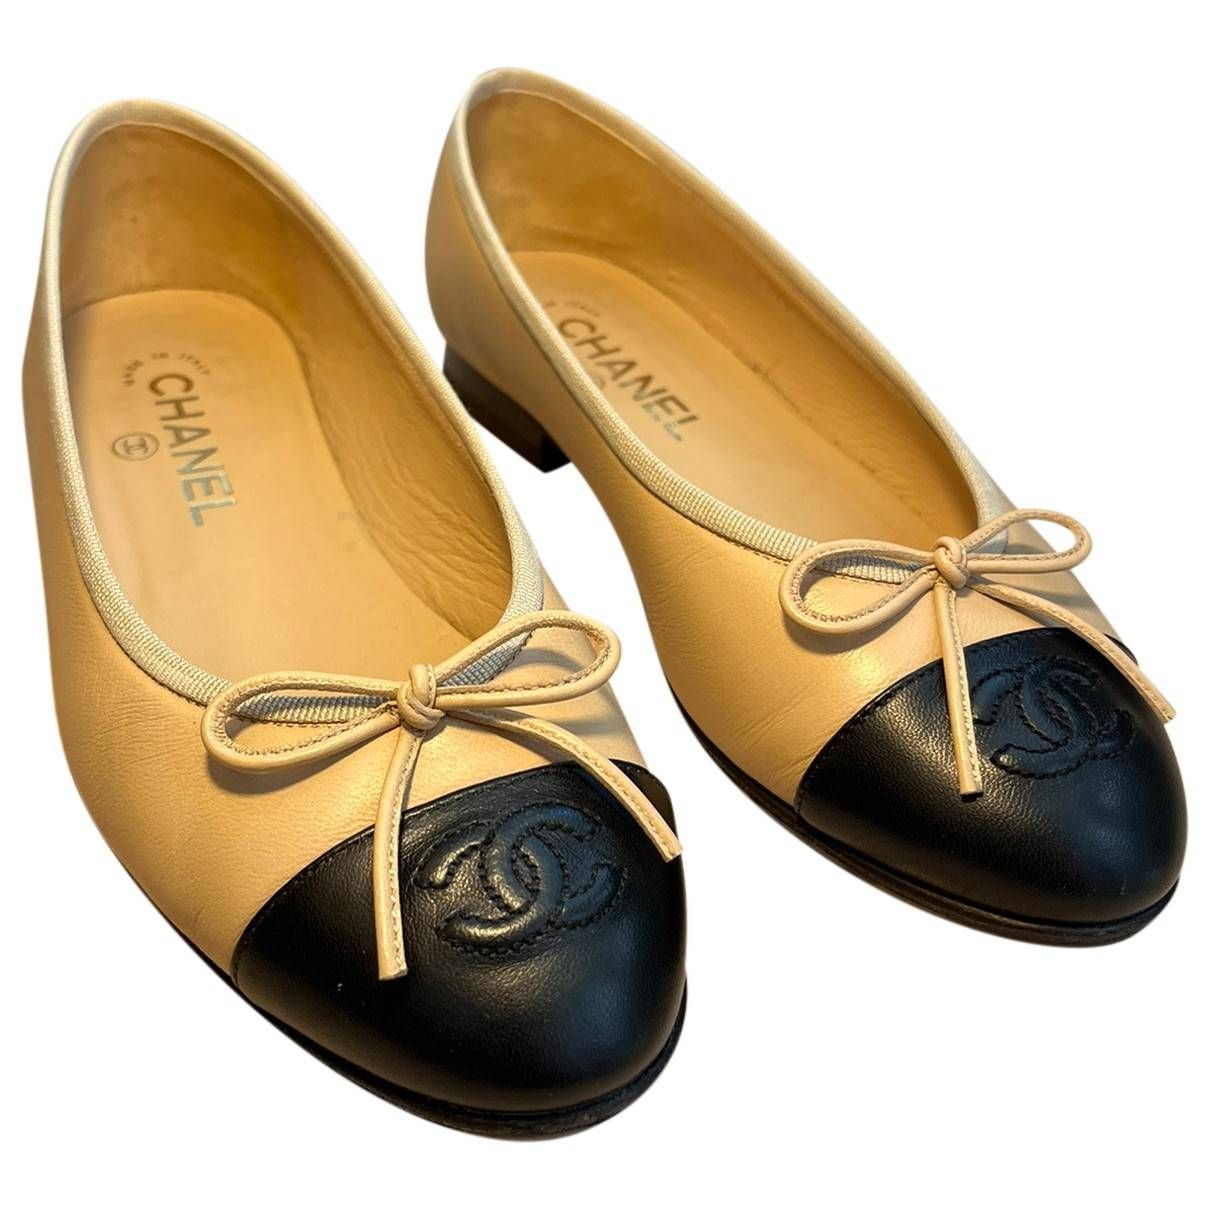 THE Chanel Ballet Flats review Sizing 2023 prices and more